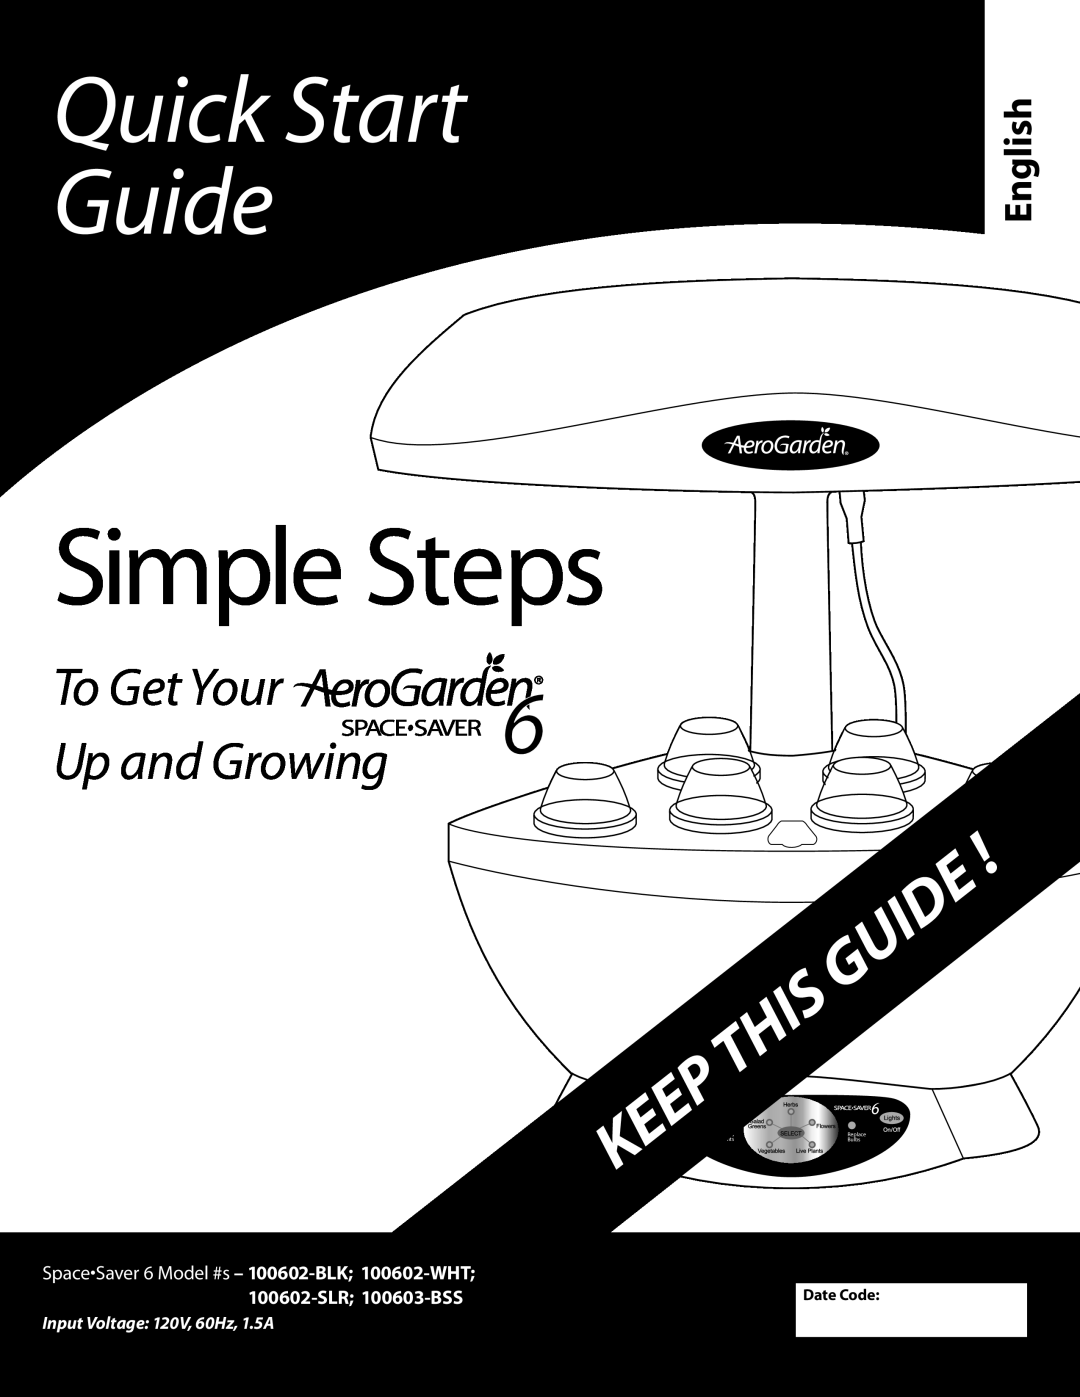 AeroGarden 100602-WHT, 200340 quick start Simple Steps, Quick Start Guide, To Get Your Up and Growing, English, Date Code 